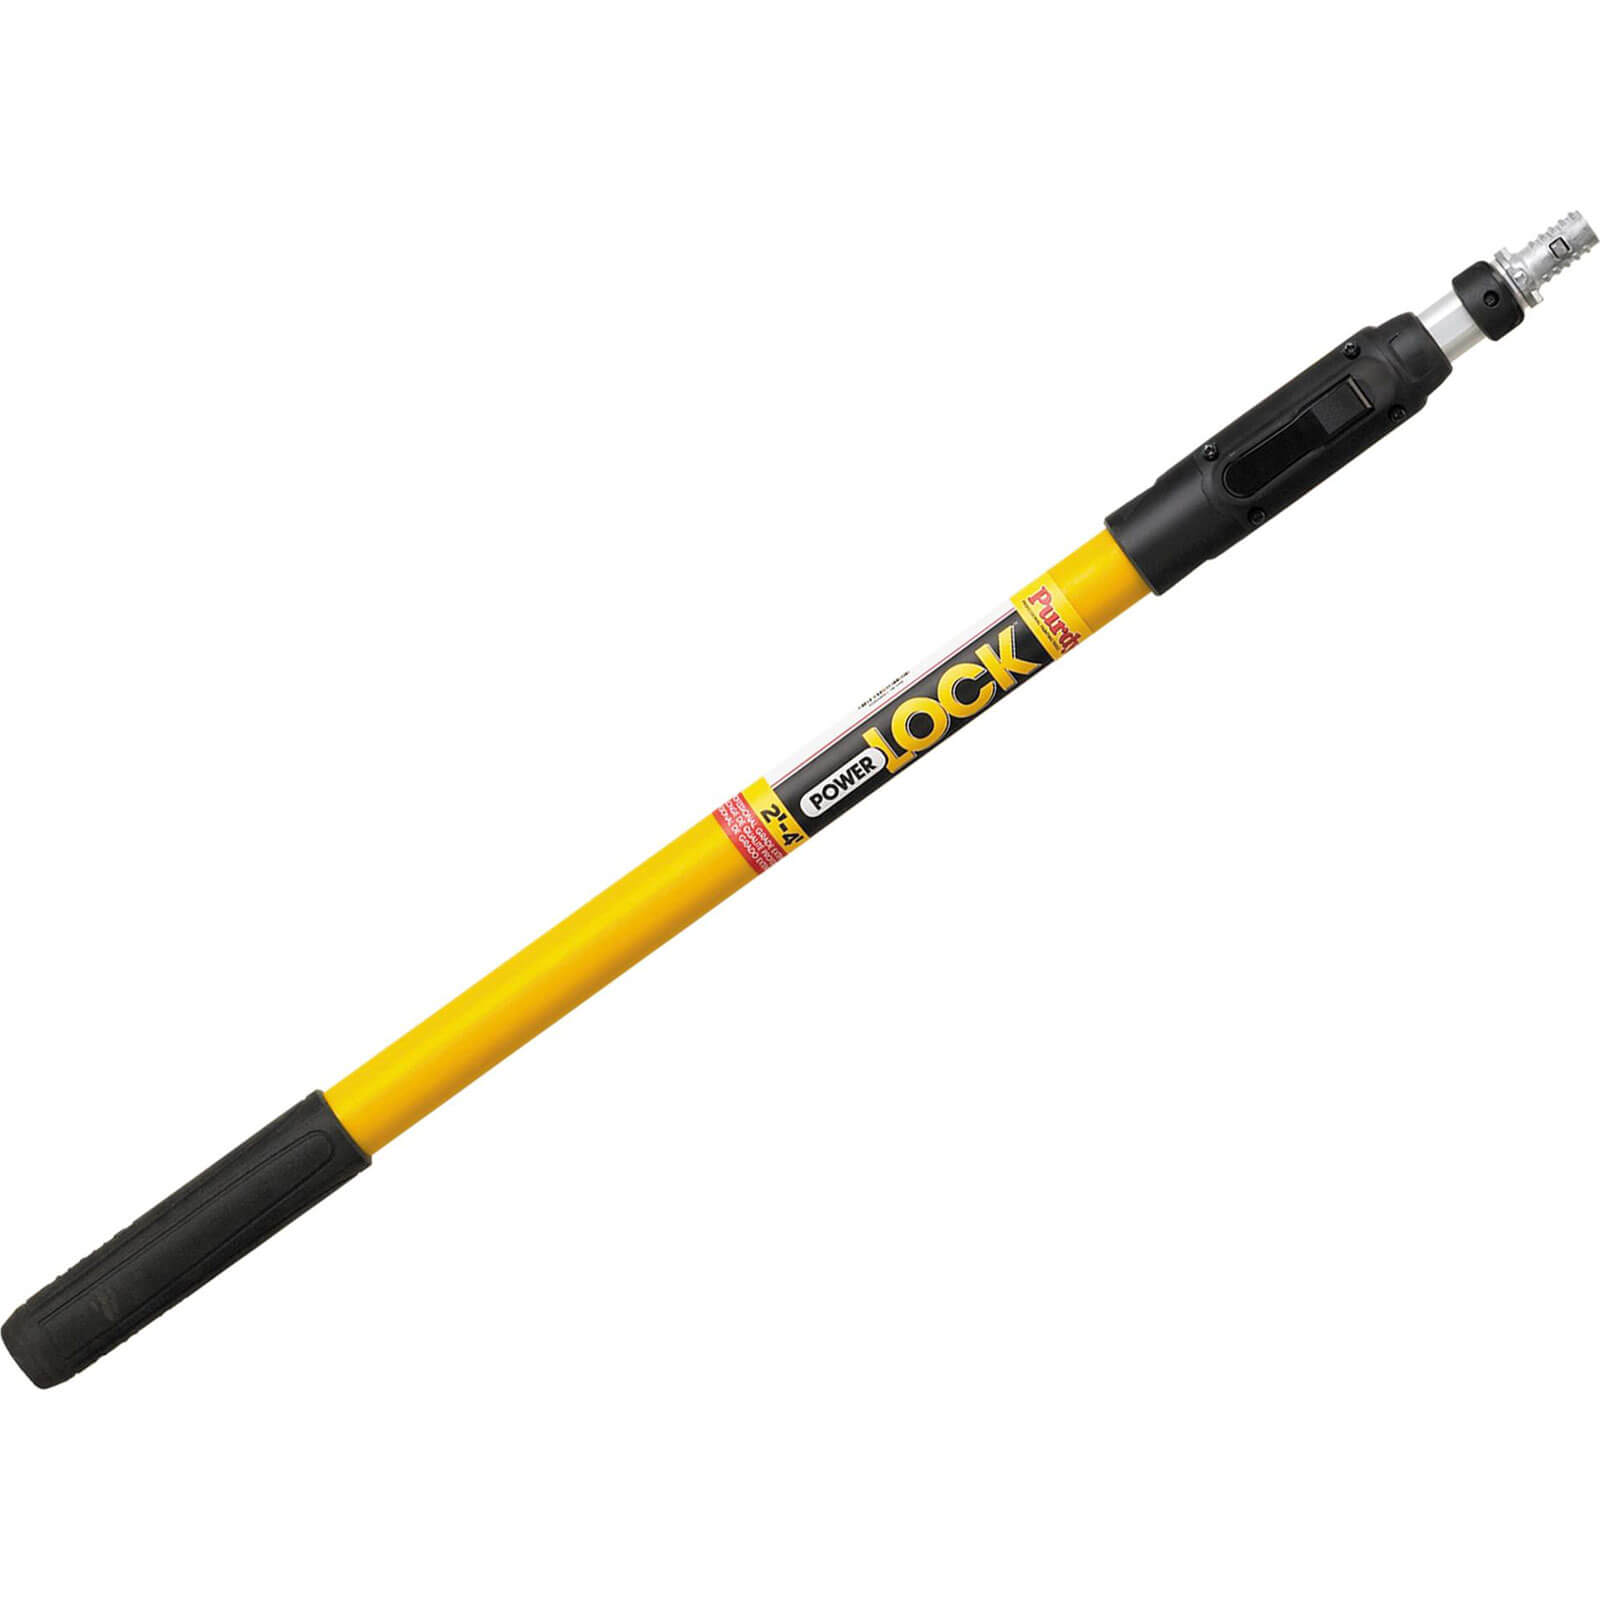 Image of Purdy Power Lock Telescopic Paint Roller Extension Pole 0.6m - 1.2m